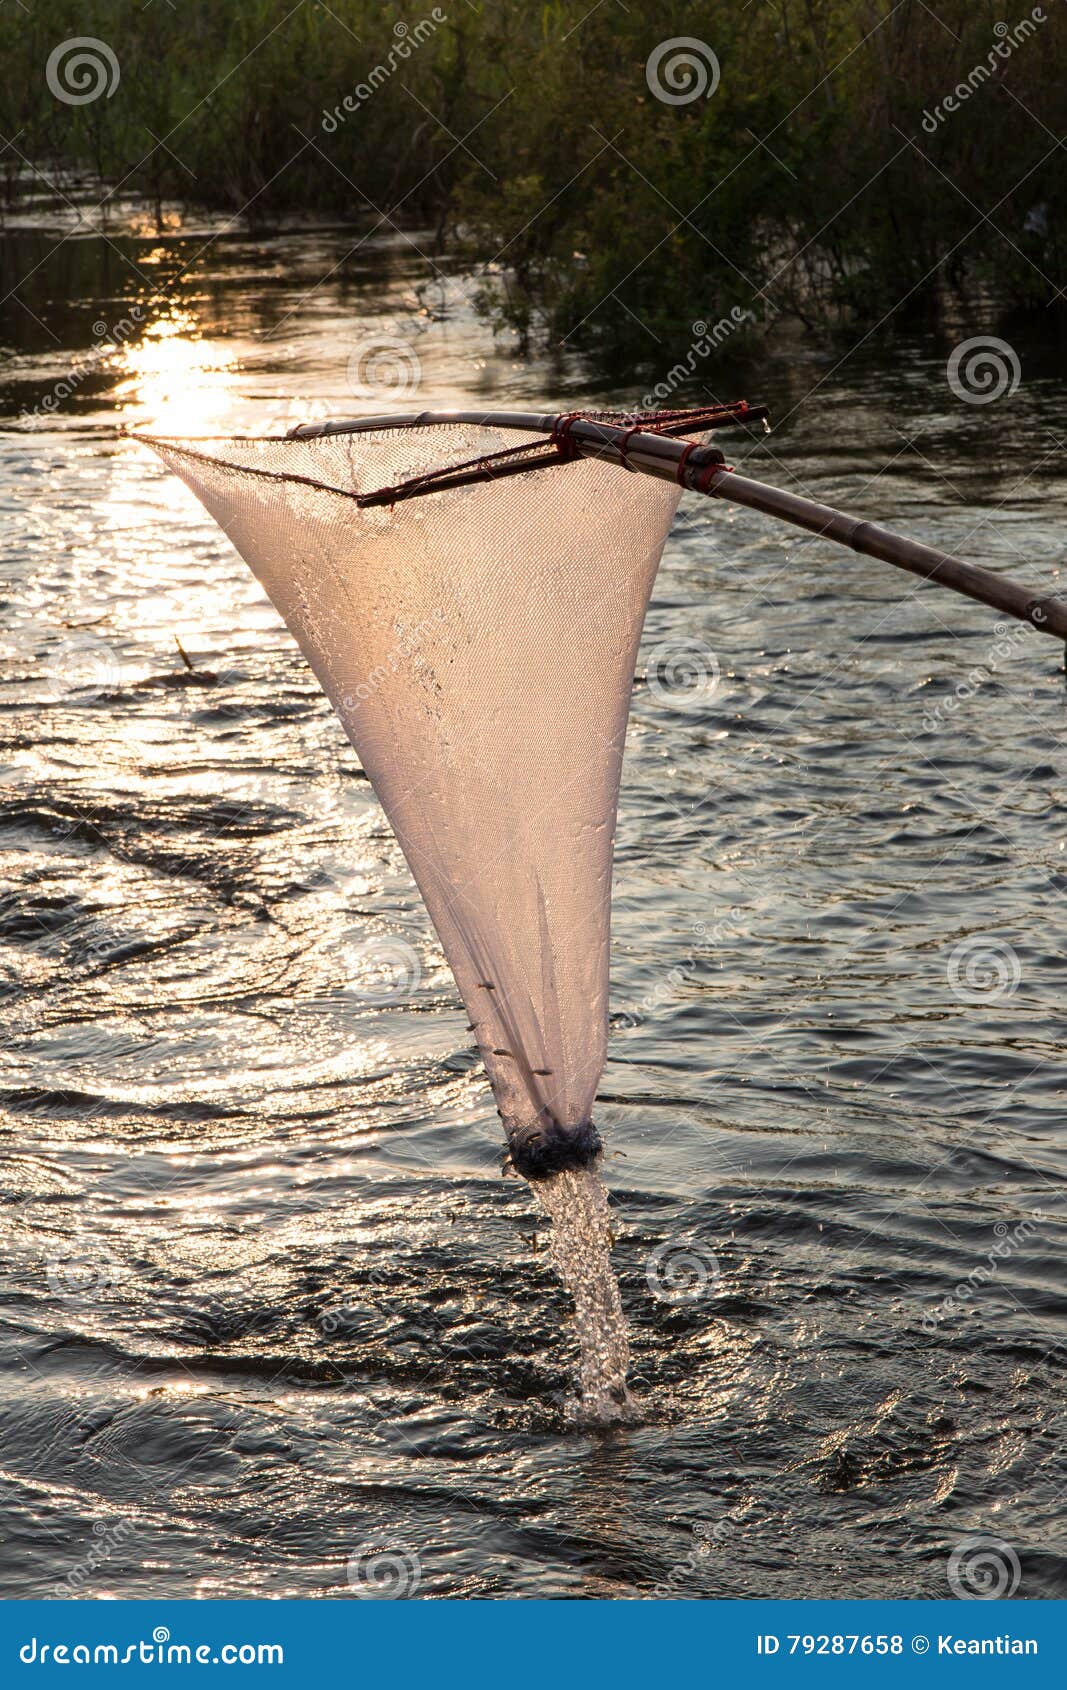 https://thumbs.dreamstime.com/z/net-mesh-scoop-fish-light-close-nets-small-shoots-backlit-across-canal-to-scene-79287658.jpg